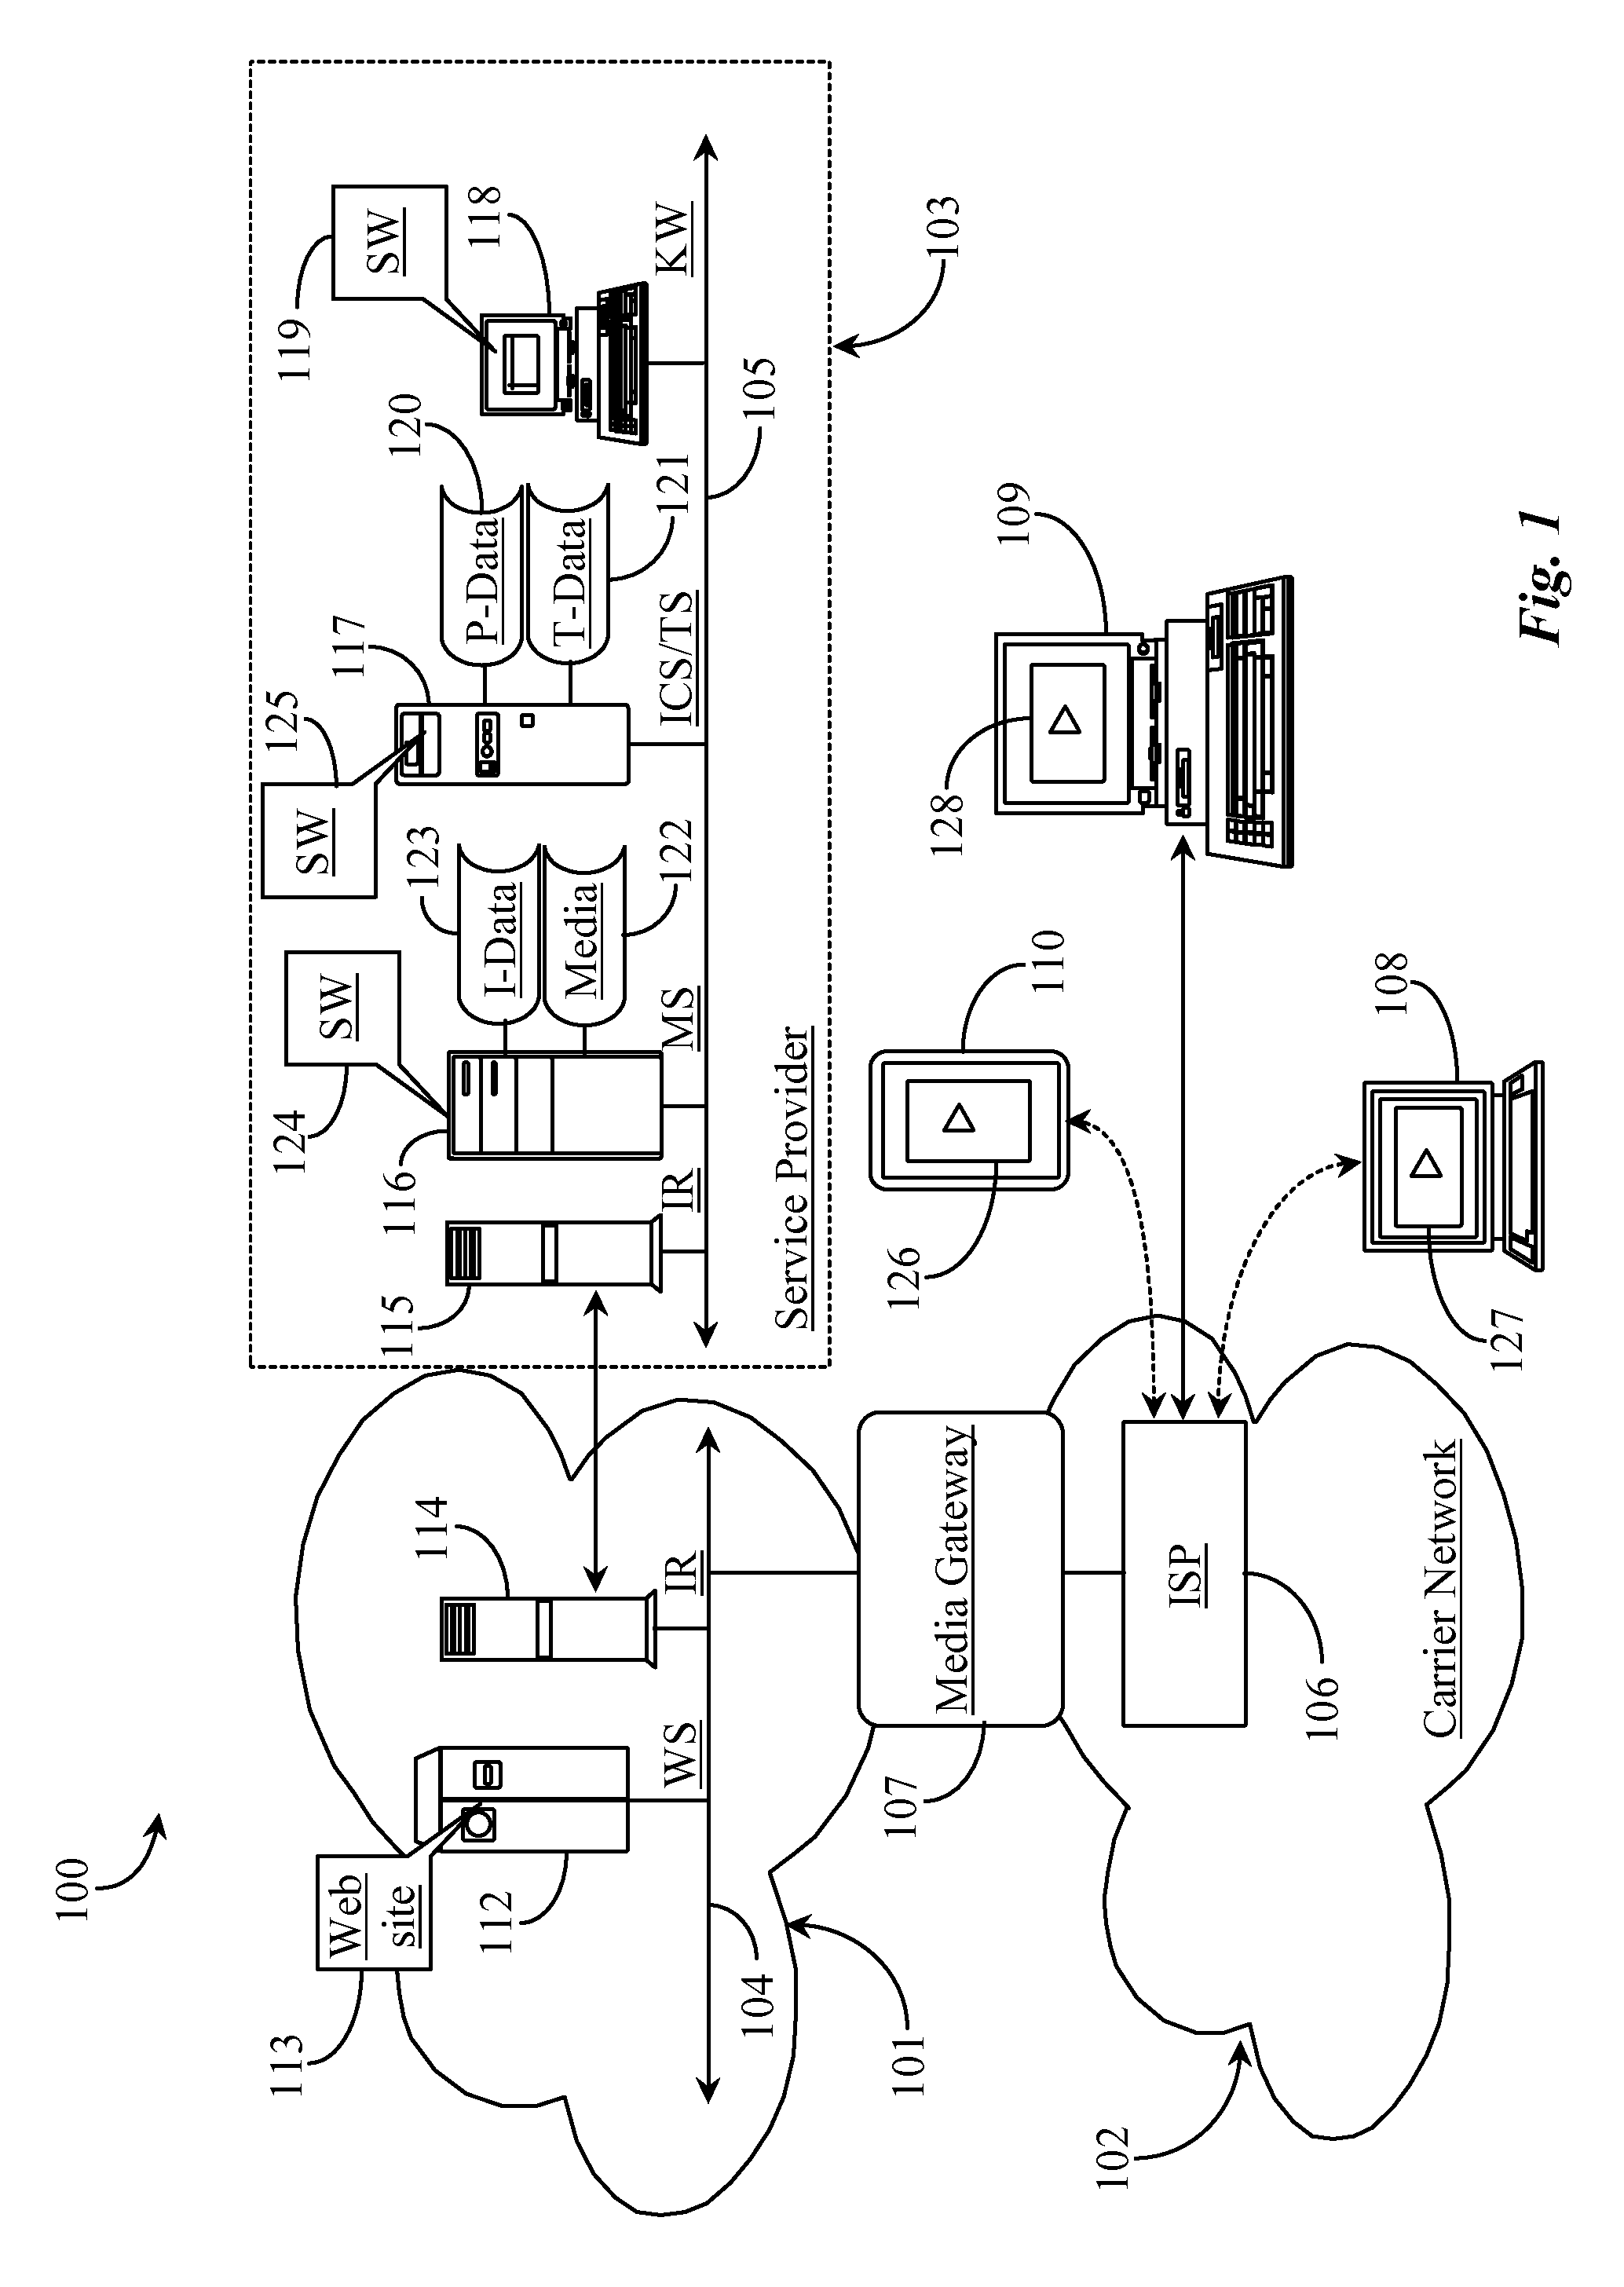 System for Managing Product Inventory Counts